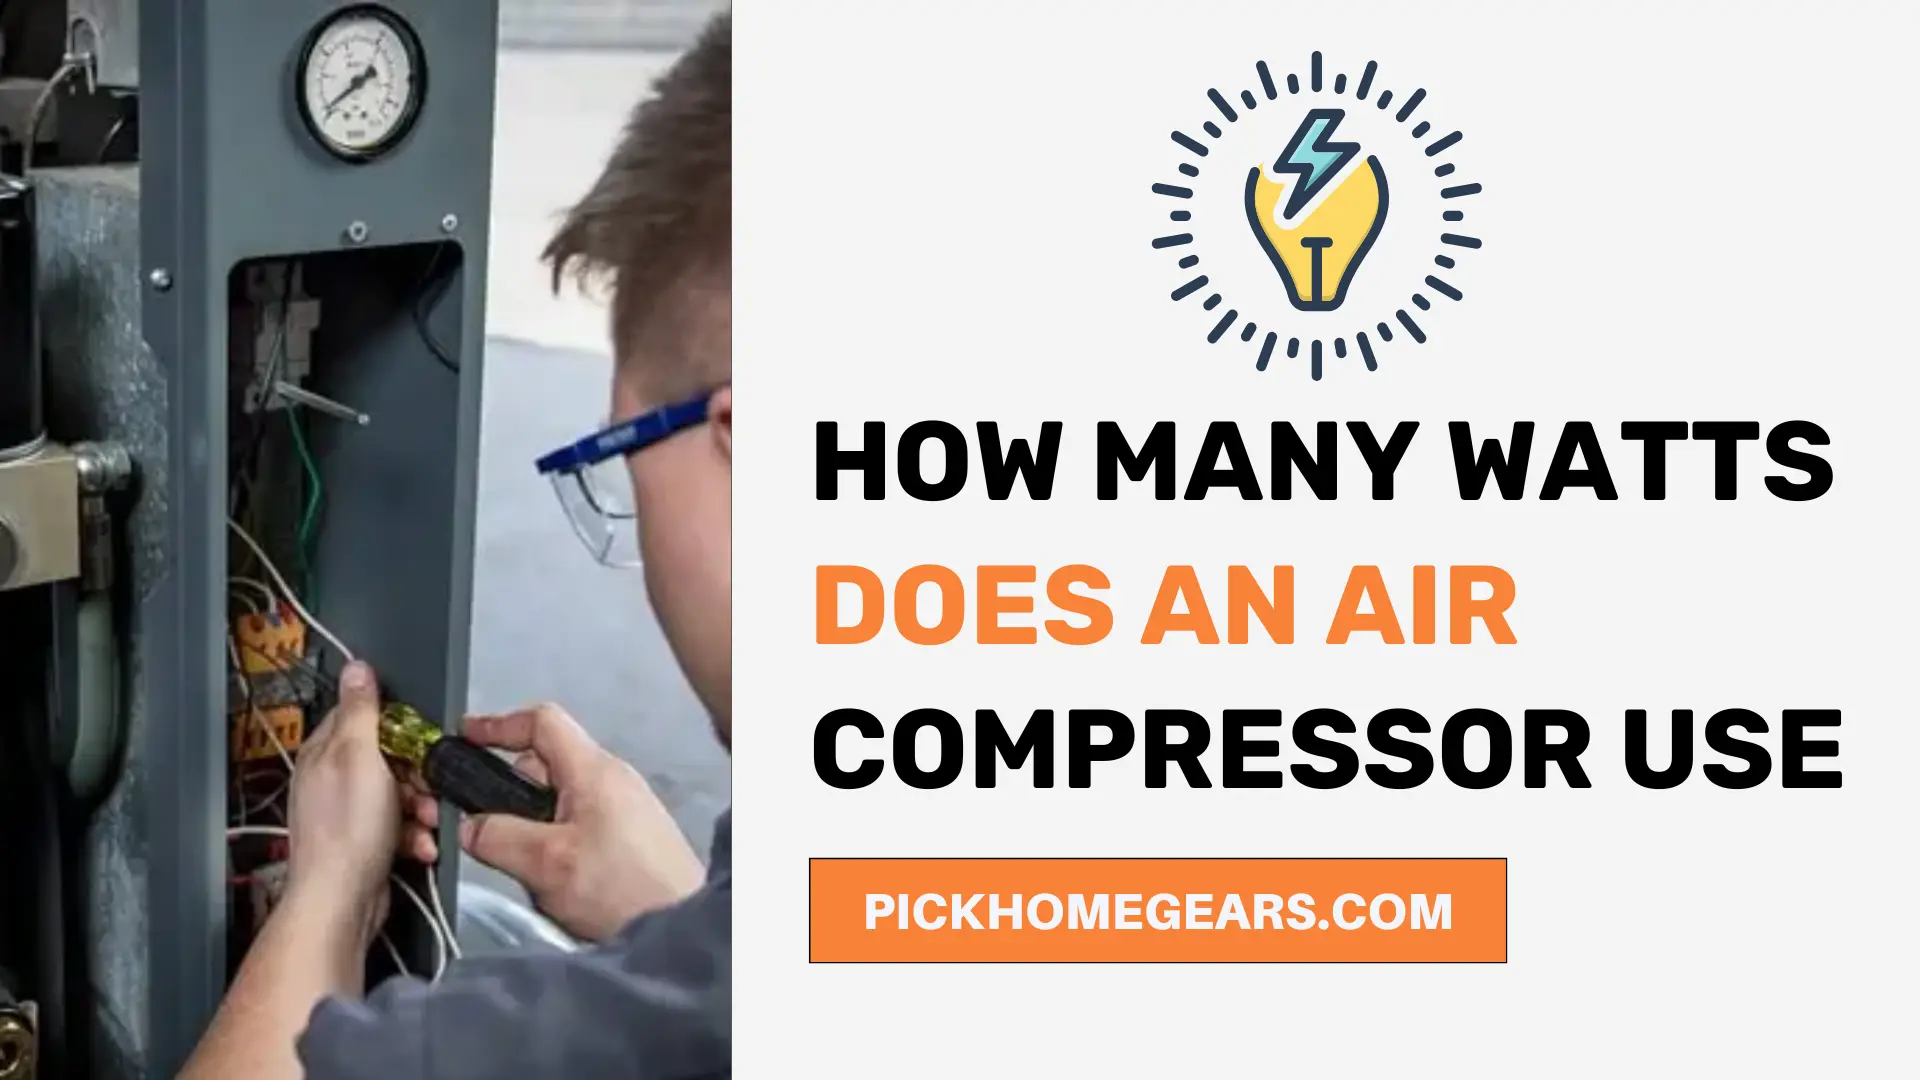 How Many Watts does an Air Compressor Use